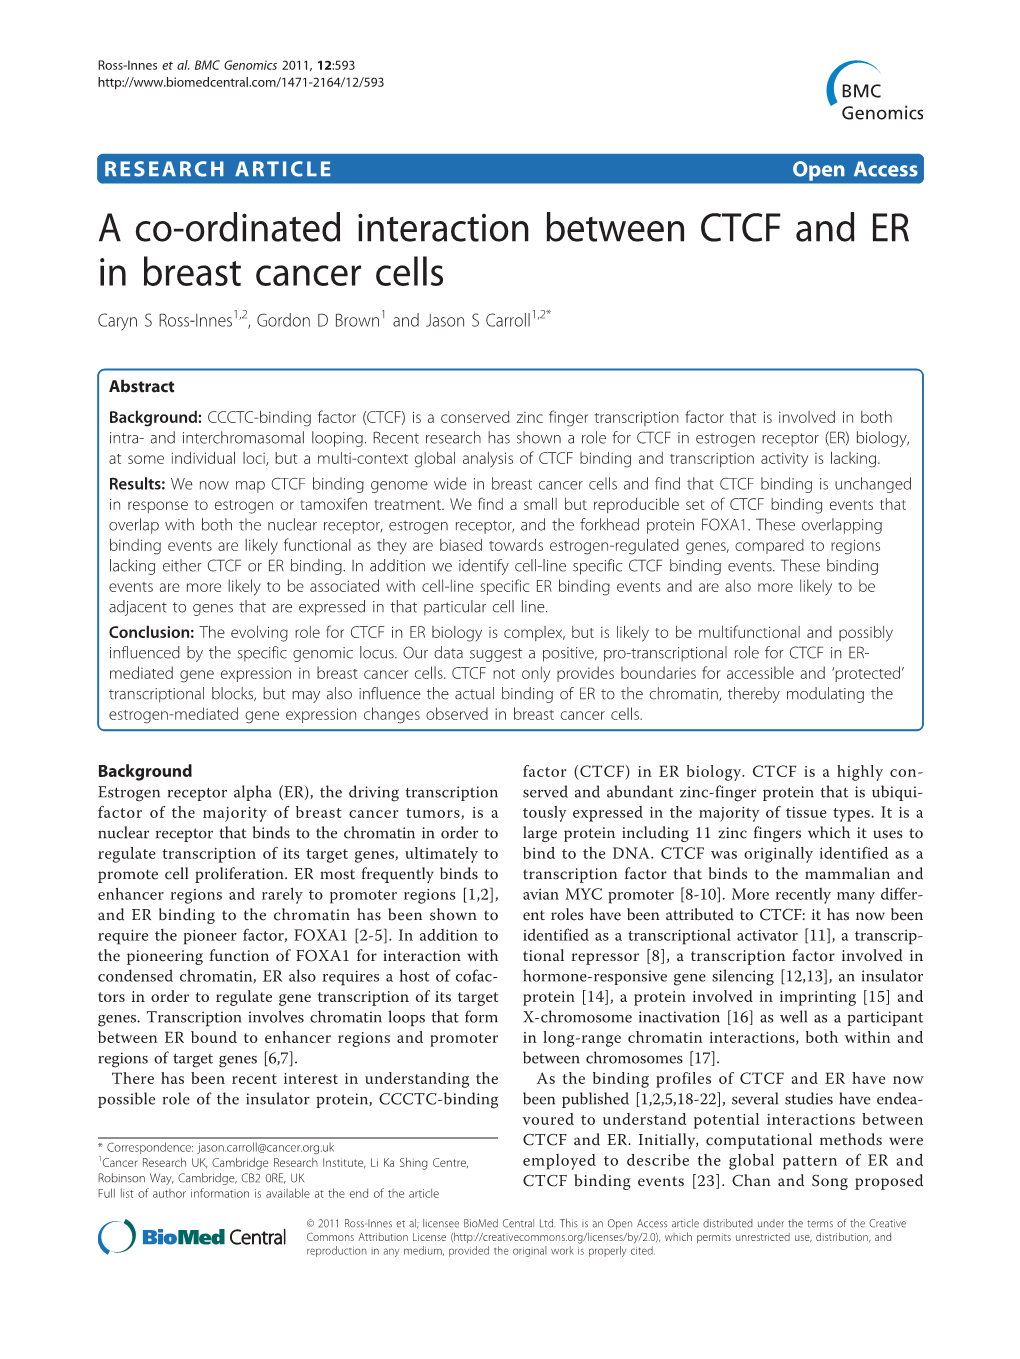 A Co-Ordinated Interaction Between CTCF and ER in Breast Cancer Cells Caryn S Ross-Innes1,2, Gordon D Brown1 and Jason S Carroll1,2*